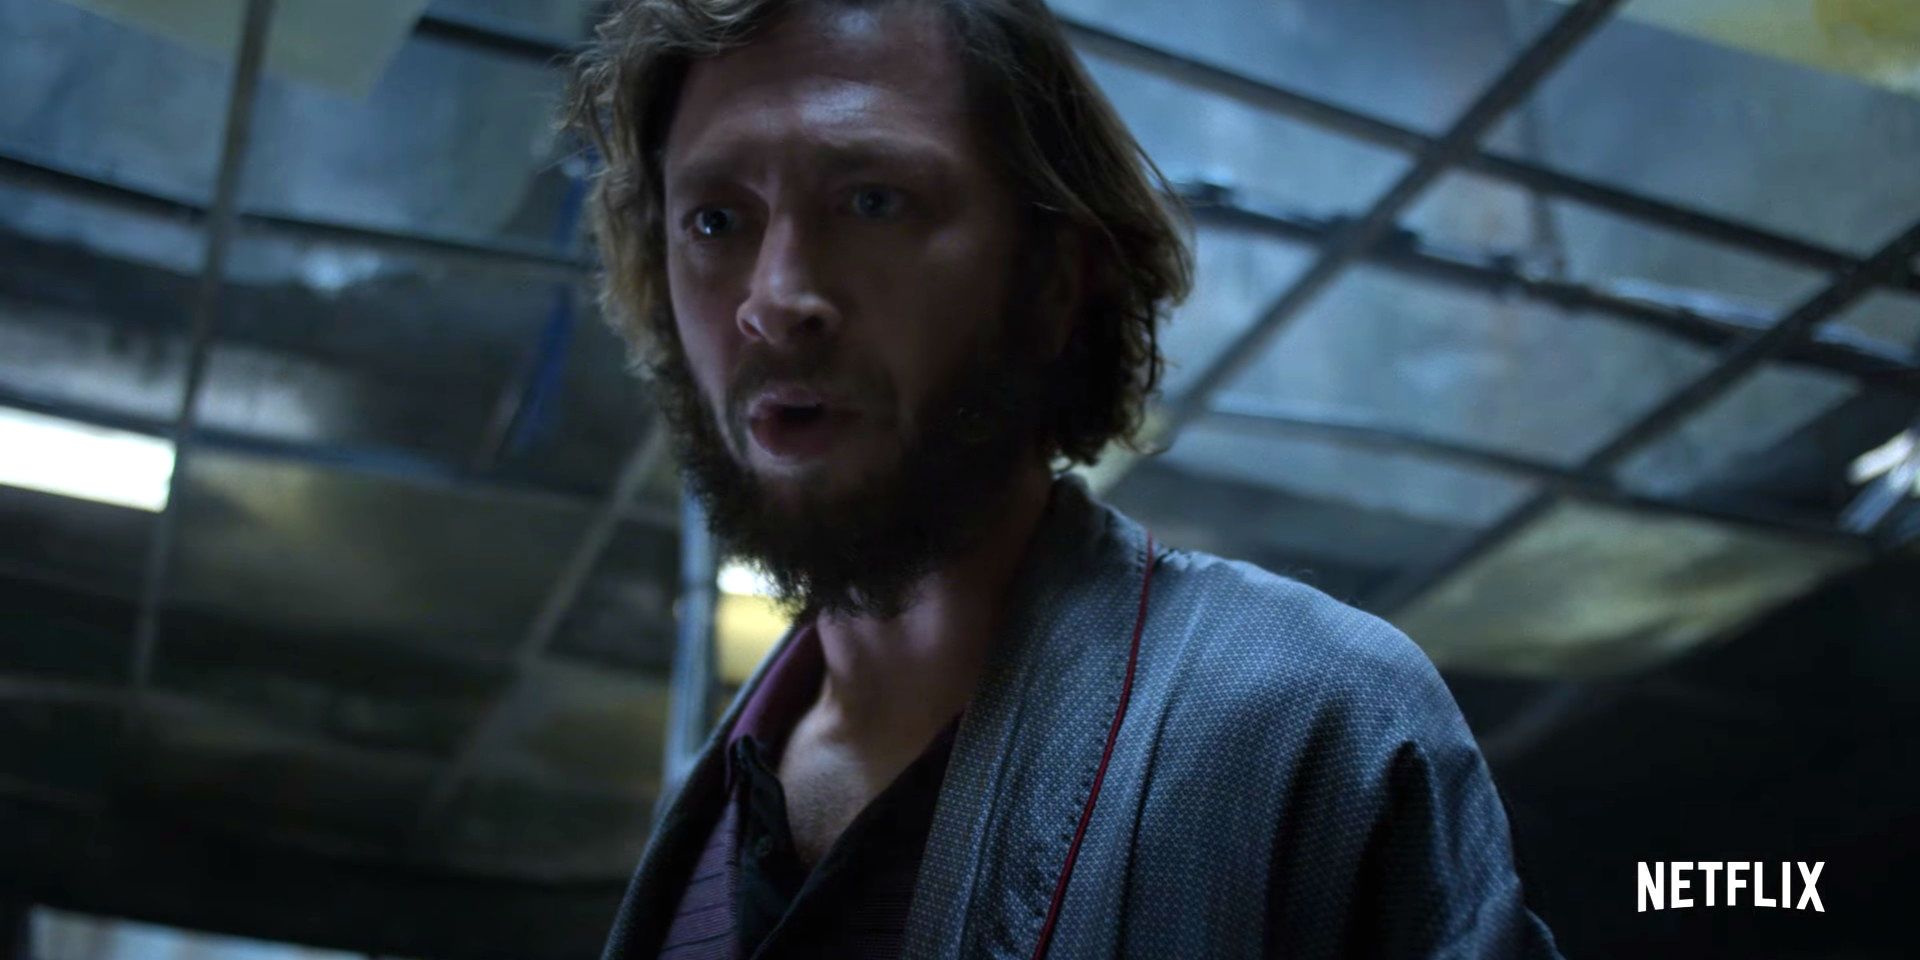 Eben Moss-Bachrach is concerned as Micro in The Punisher